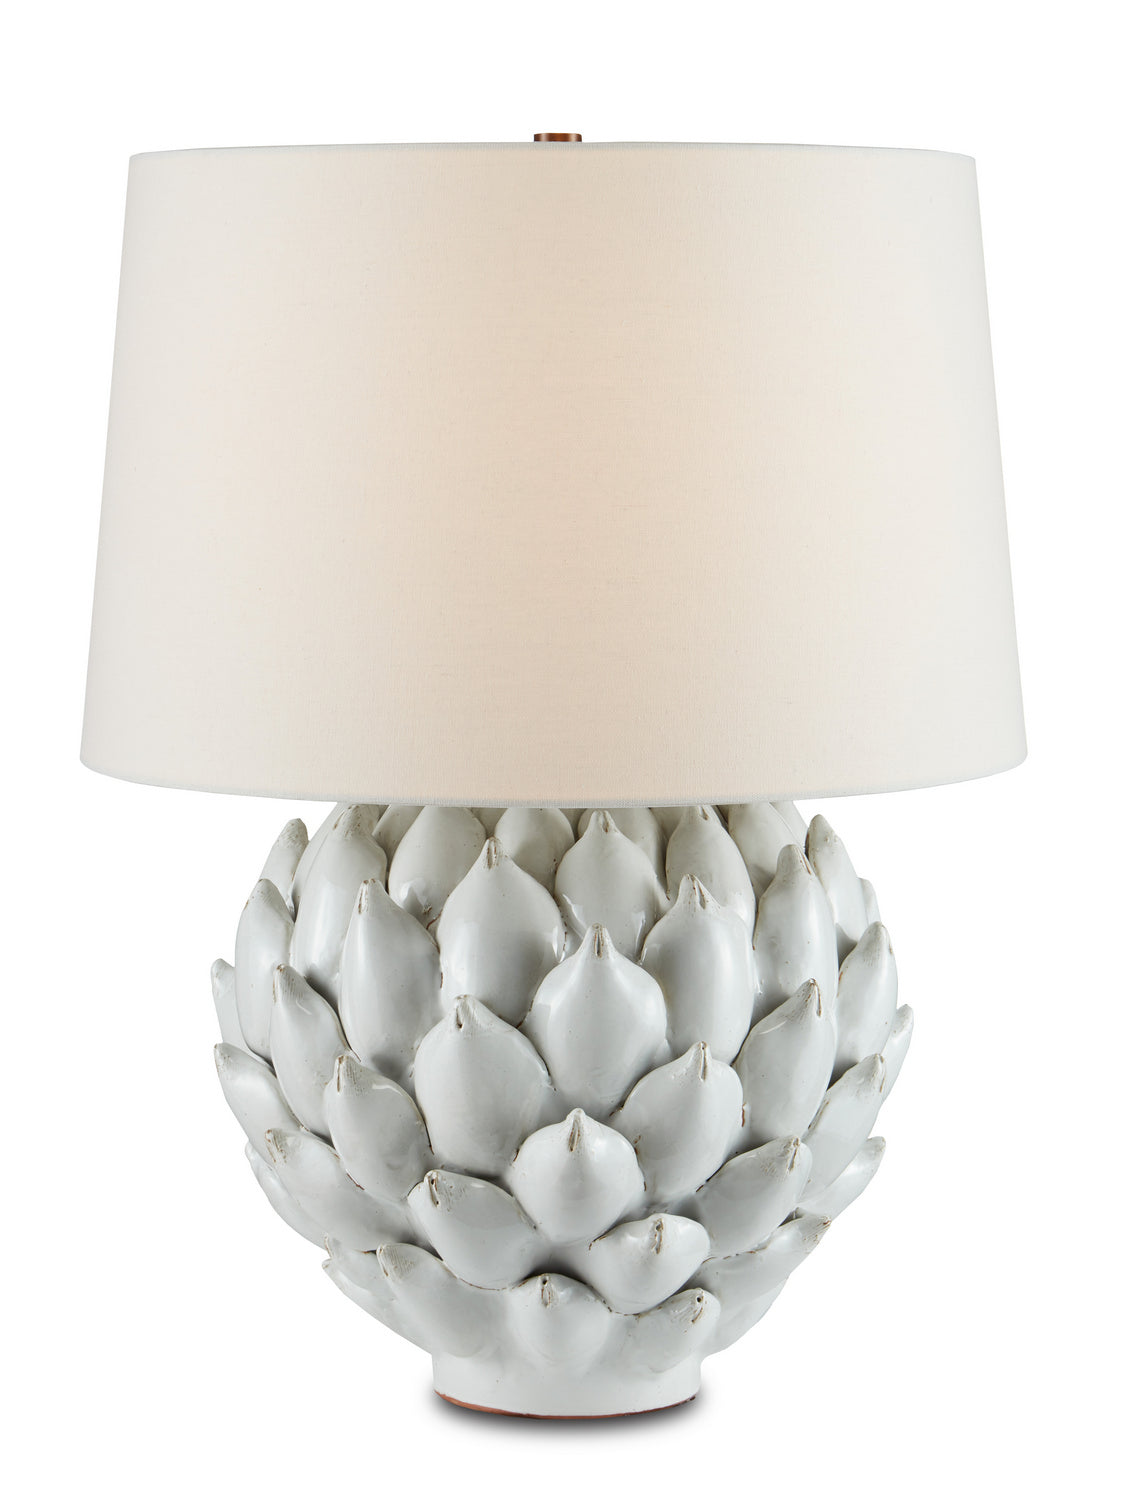 One Light Table Lamp from the Cynara collection in Antique White finish